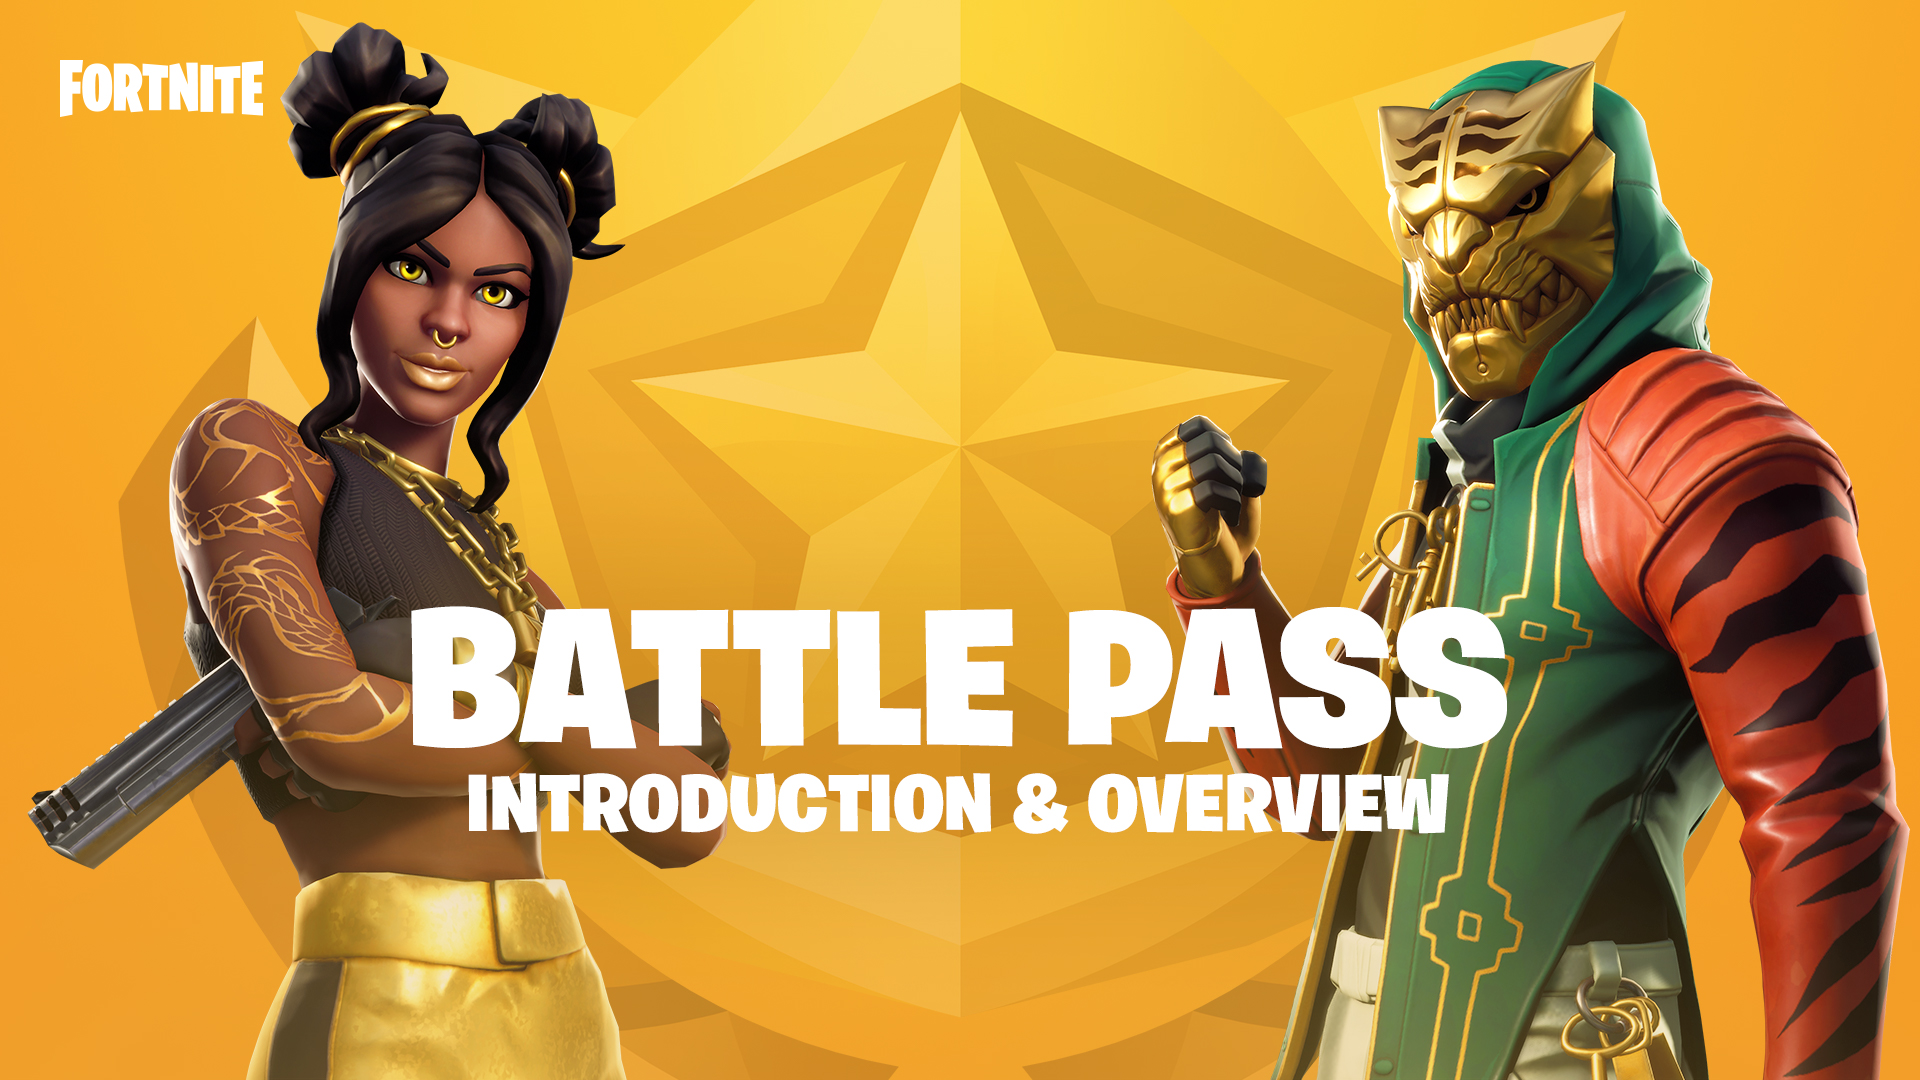 Fortnite Characters Holding Controller Png Fortnite Free Game - fortnite characters holding controller png fortnite for xbox one xbox